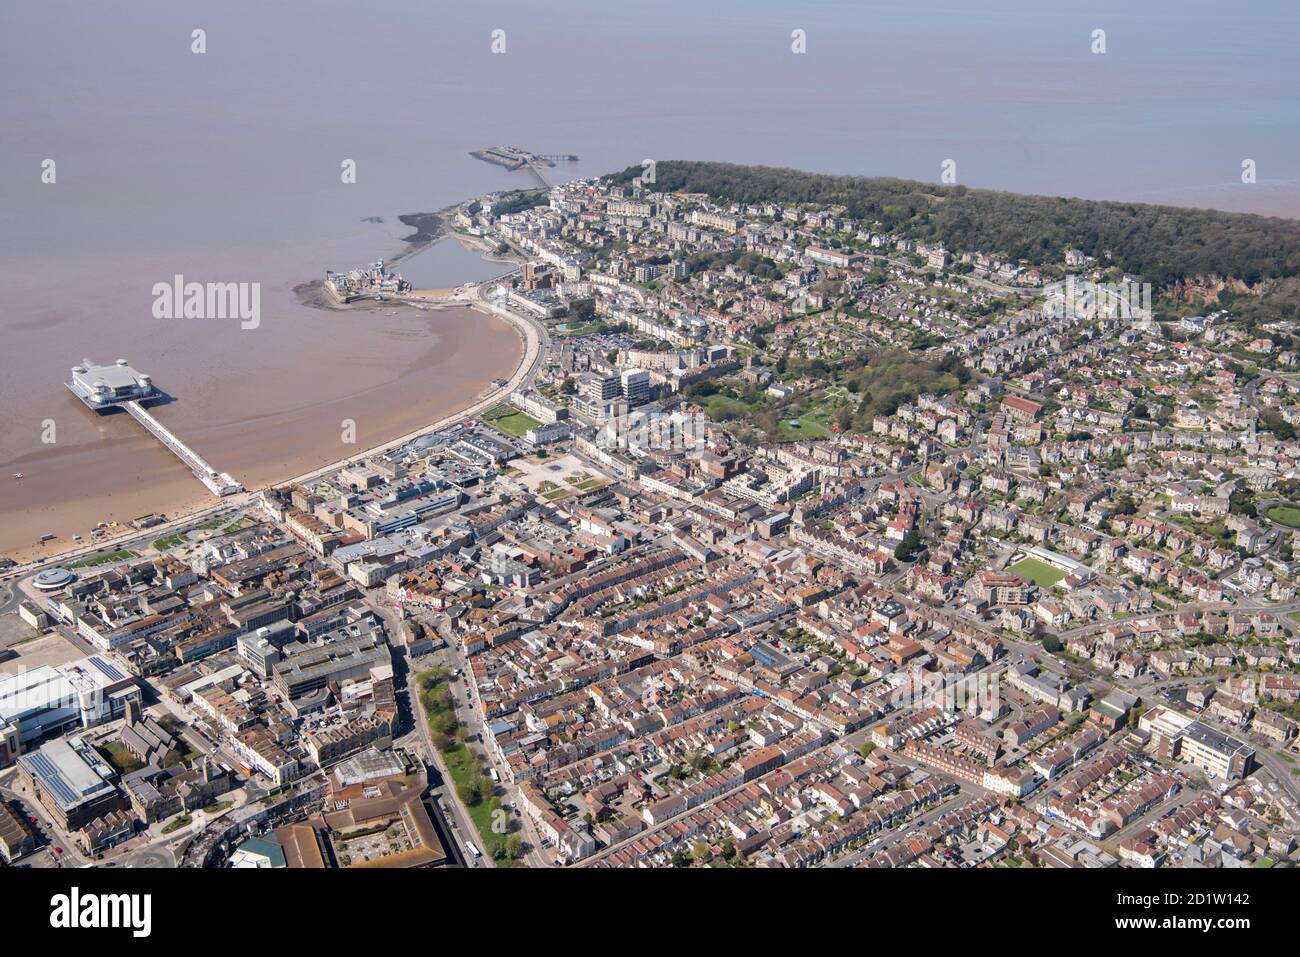 The Seaside Town and Pleasure Pier, Weston-Super-Mare, North Somerset, 2018, UK. Aerial view. Stock Photo